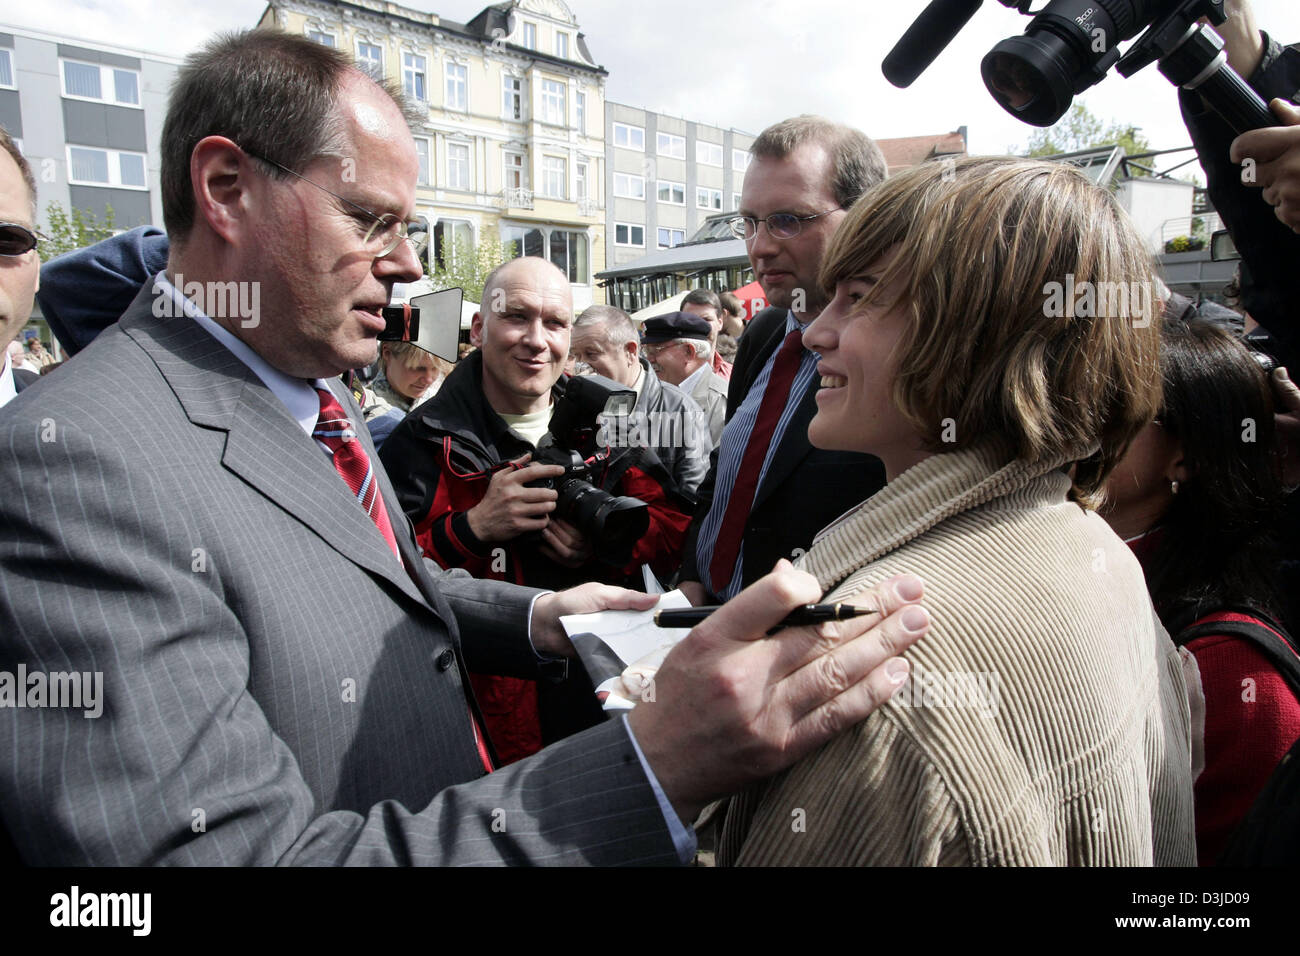 (dpa) - Peer Steinbrueck (SPD), Premier of the state of North Rhine Westphalia, speaks to local residents during his election campaign in the town of Herford, Germany, 12 May 2005. The election for the state parliament of North Rhine Westphalia takes place on Sunday, 22 May 2005. Stock Photo